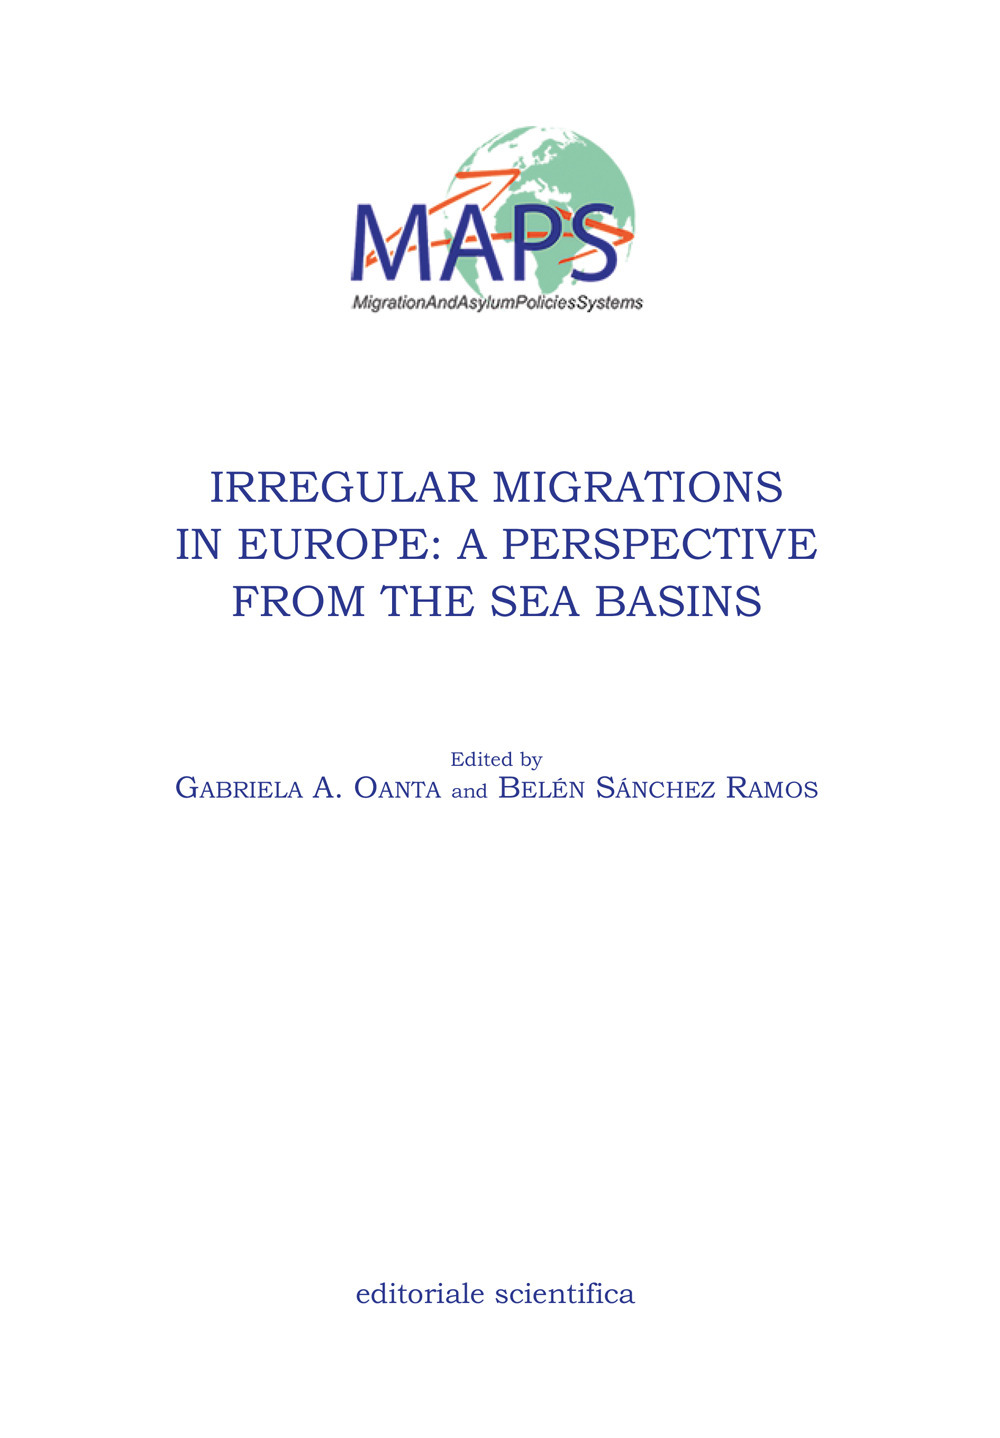 Irregular migrations in Europe: a perspective from the sea basins